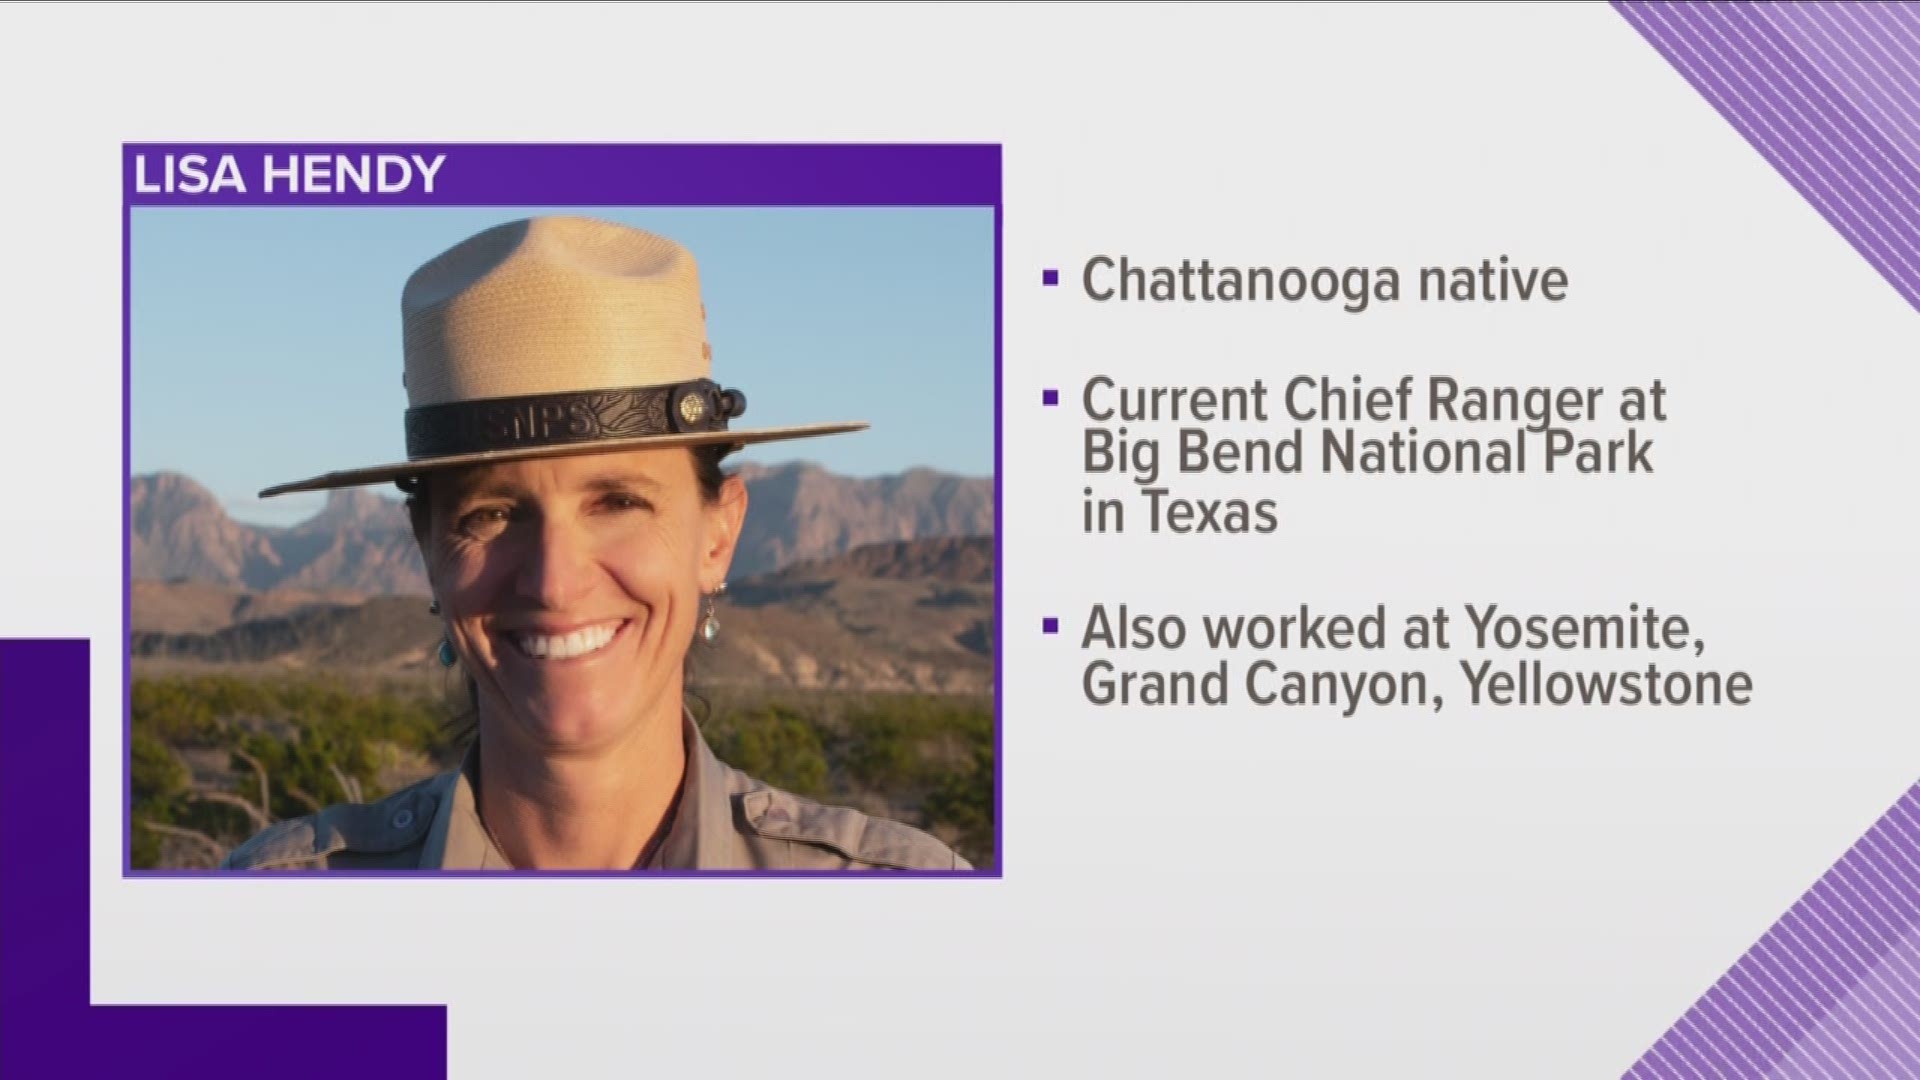 A Chattanooga woman will become the first female chief ranger of the Great Smoky Mountains National Park.